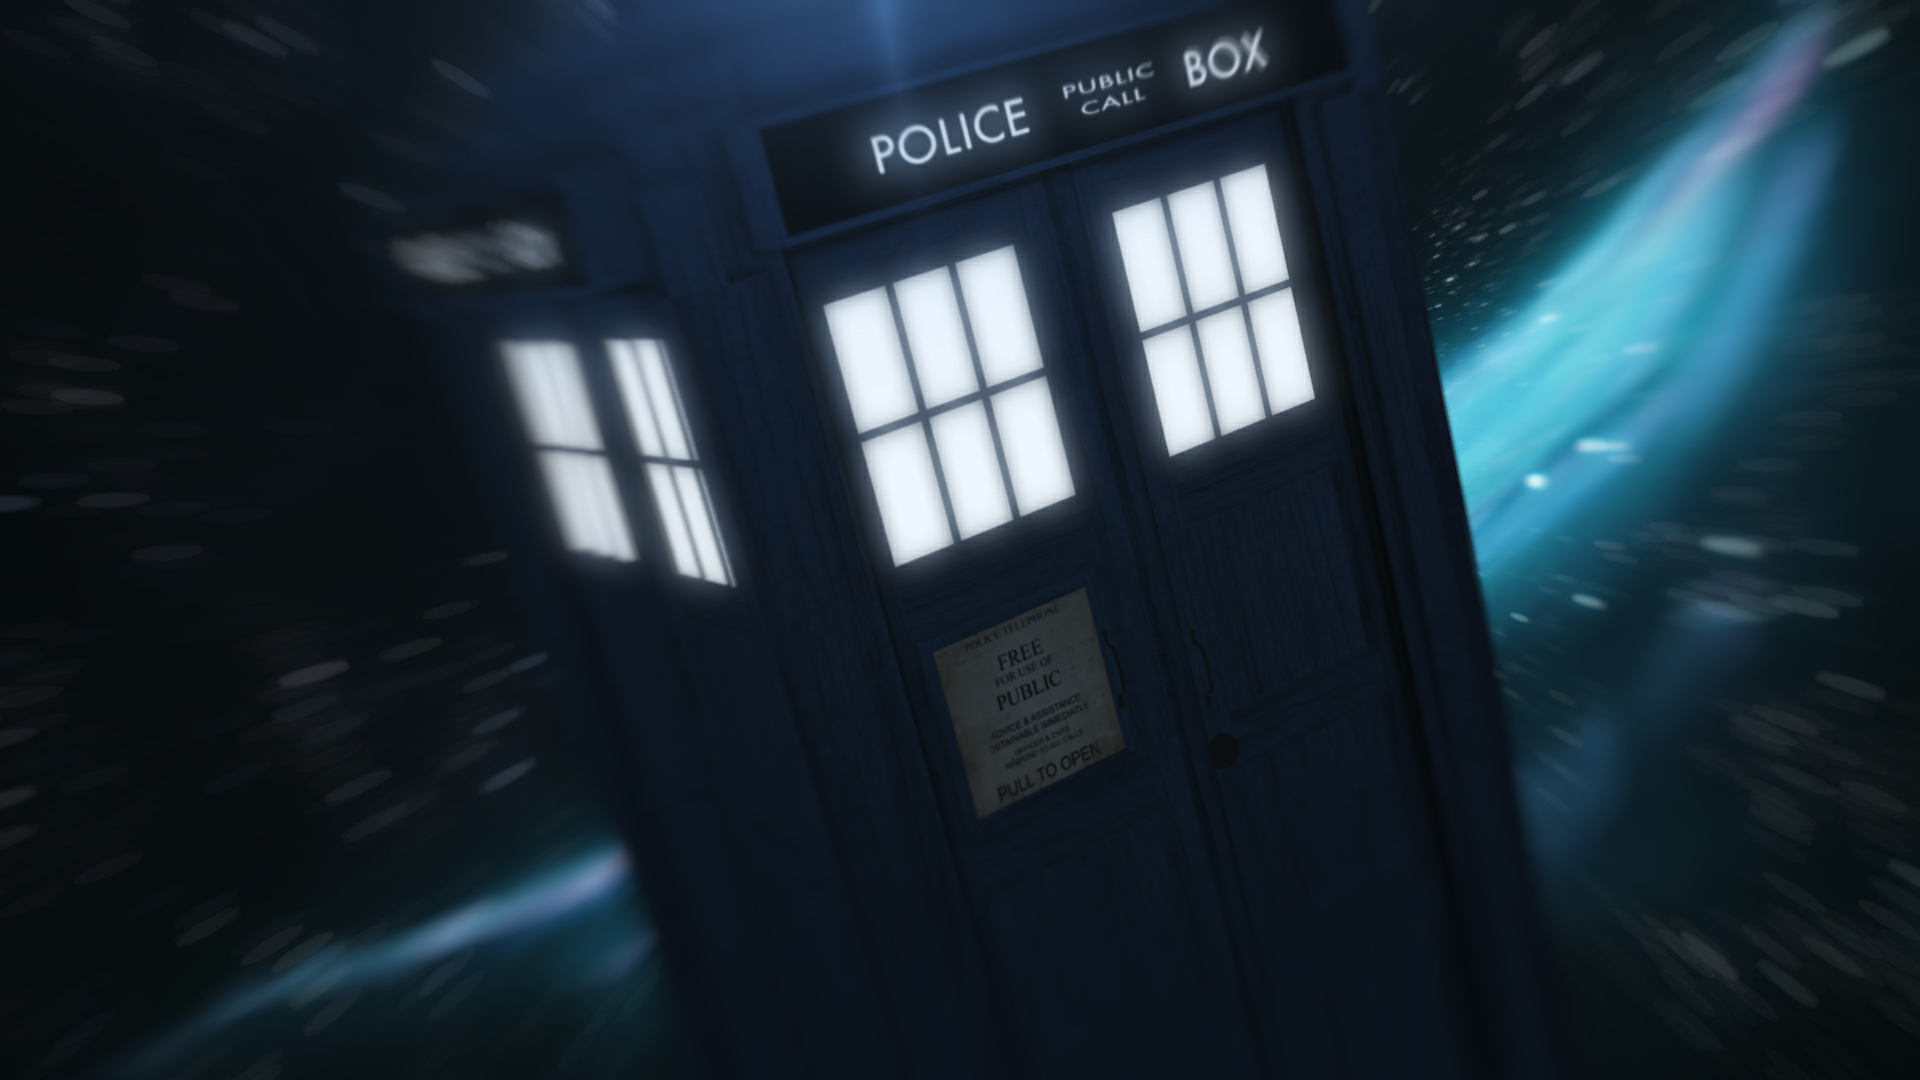 space, TV, Police Boxes, Michaelmknight, Doctor Who Wallpaper